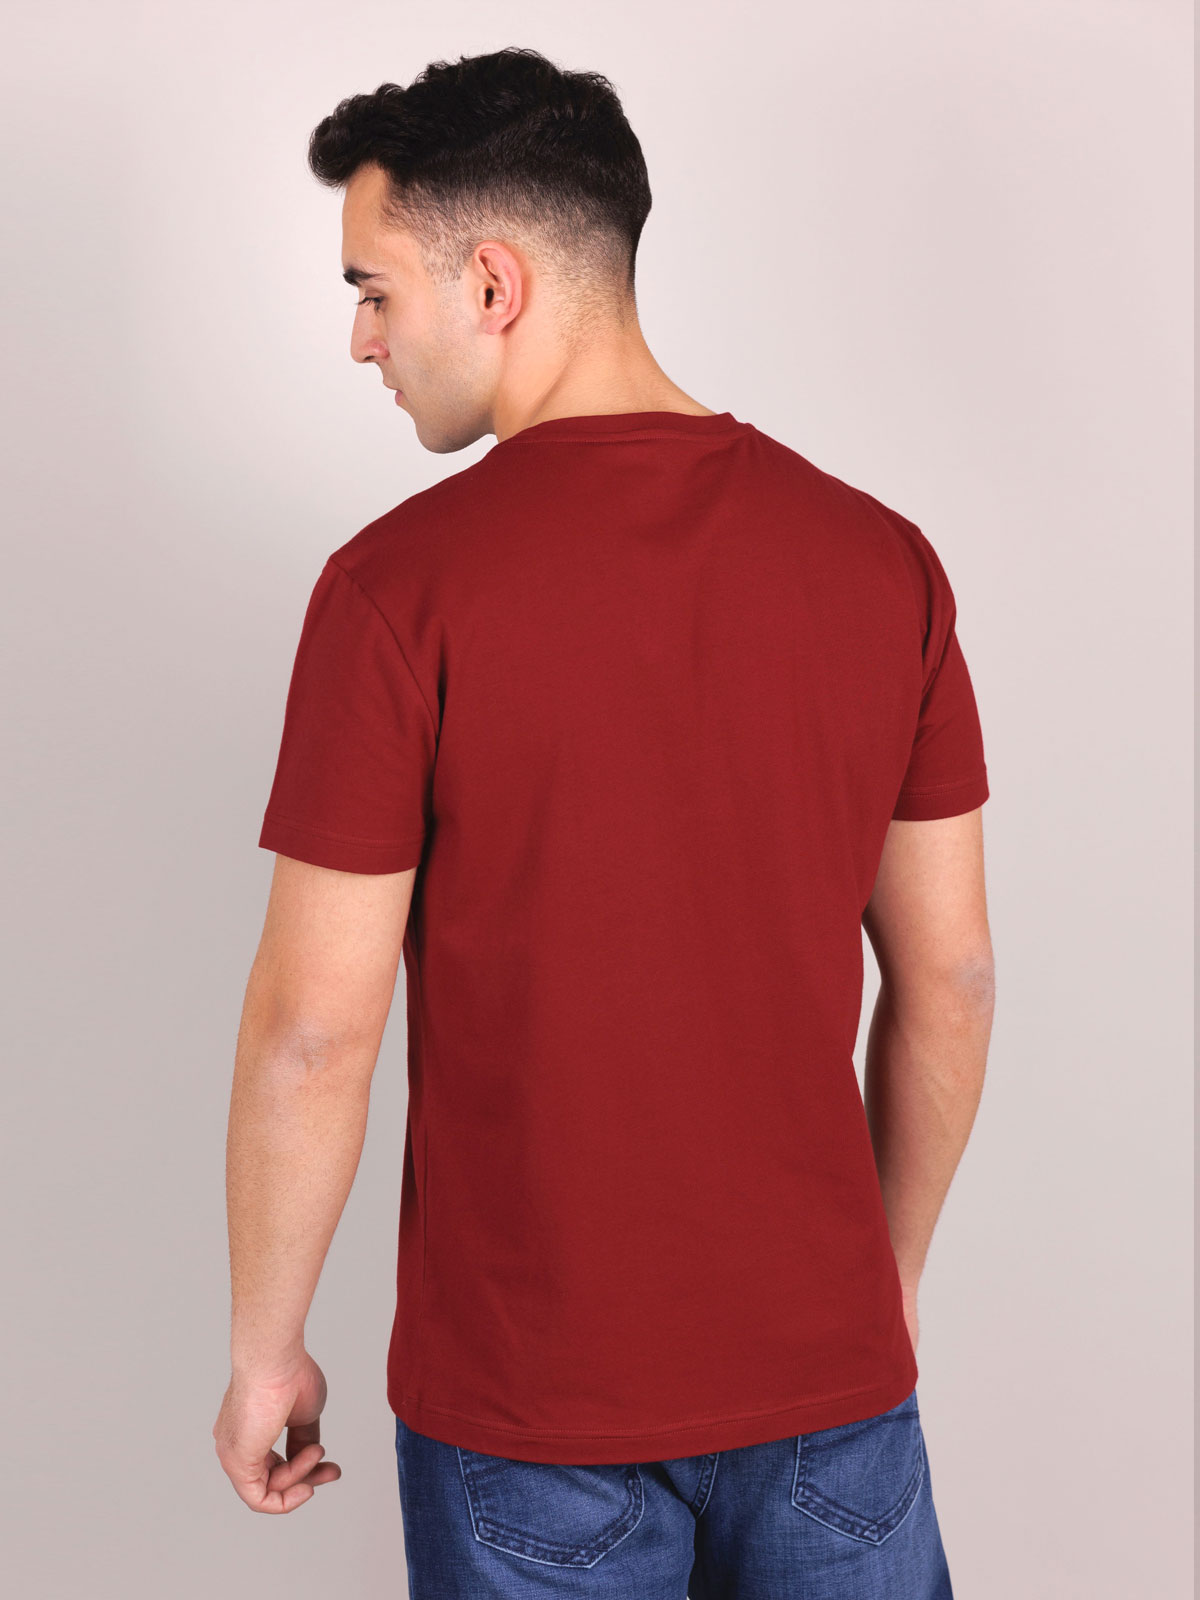 Tshirt in burgundy with a color print - 96460 € 23.62 img2